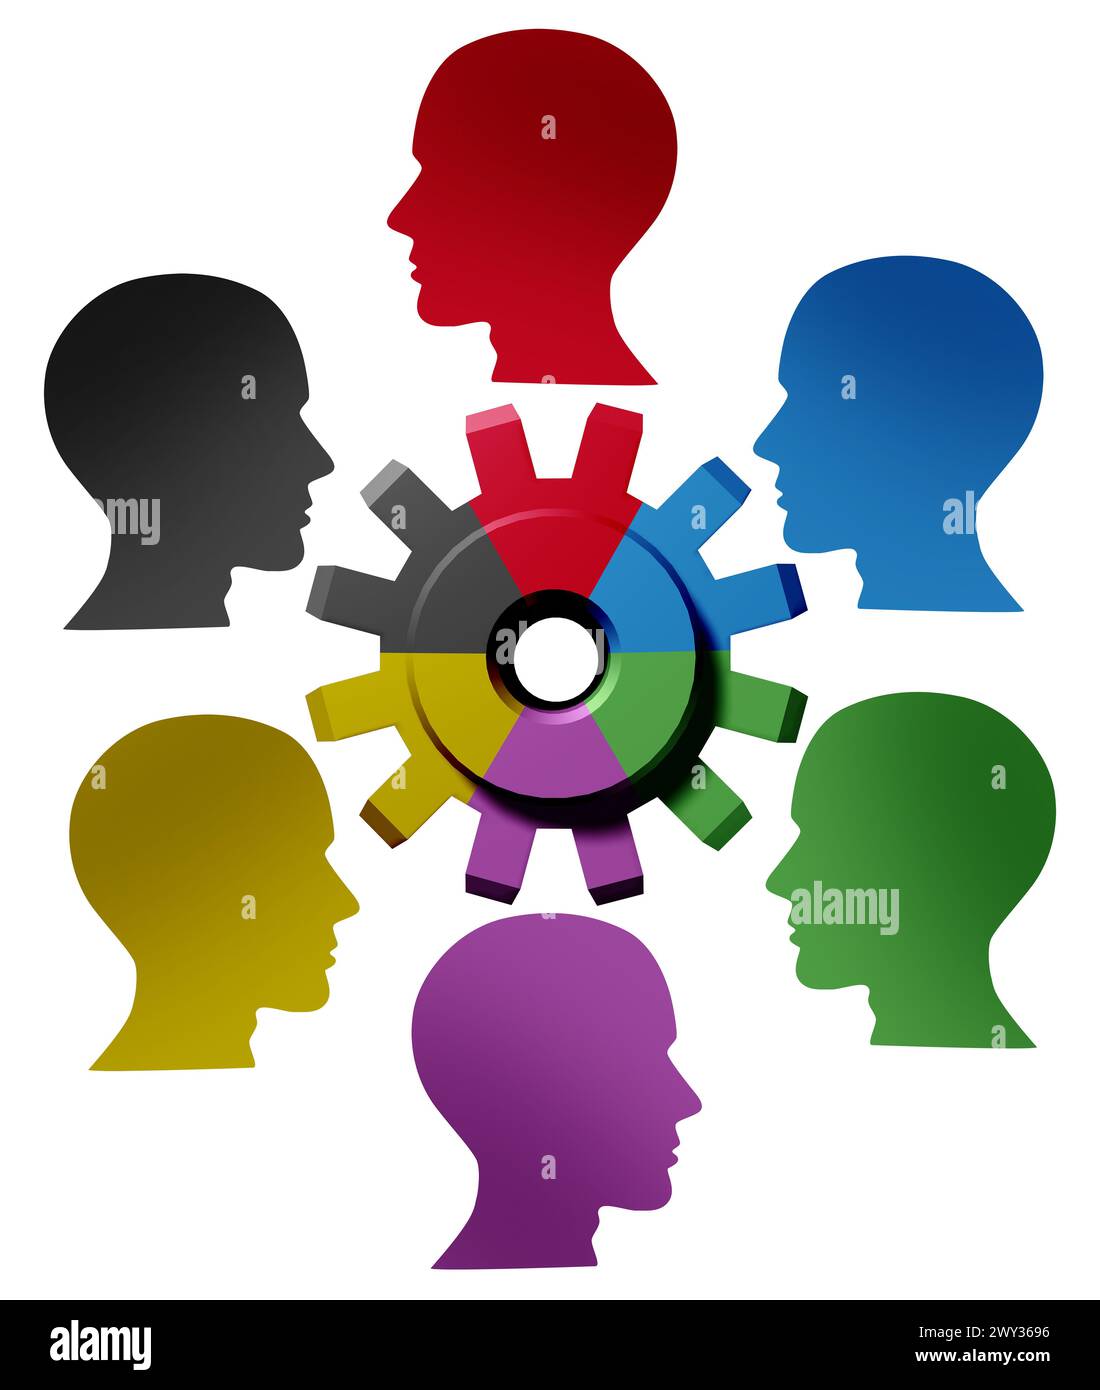 Business Group Management and team collaboration as a global community united as a cog representing employees and inclusion or belonging. Stock Photo